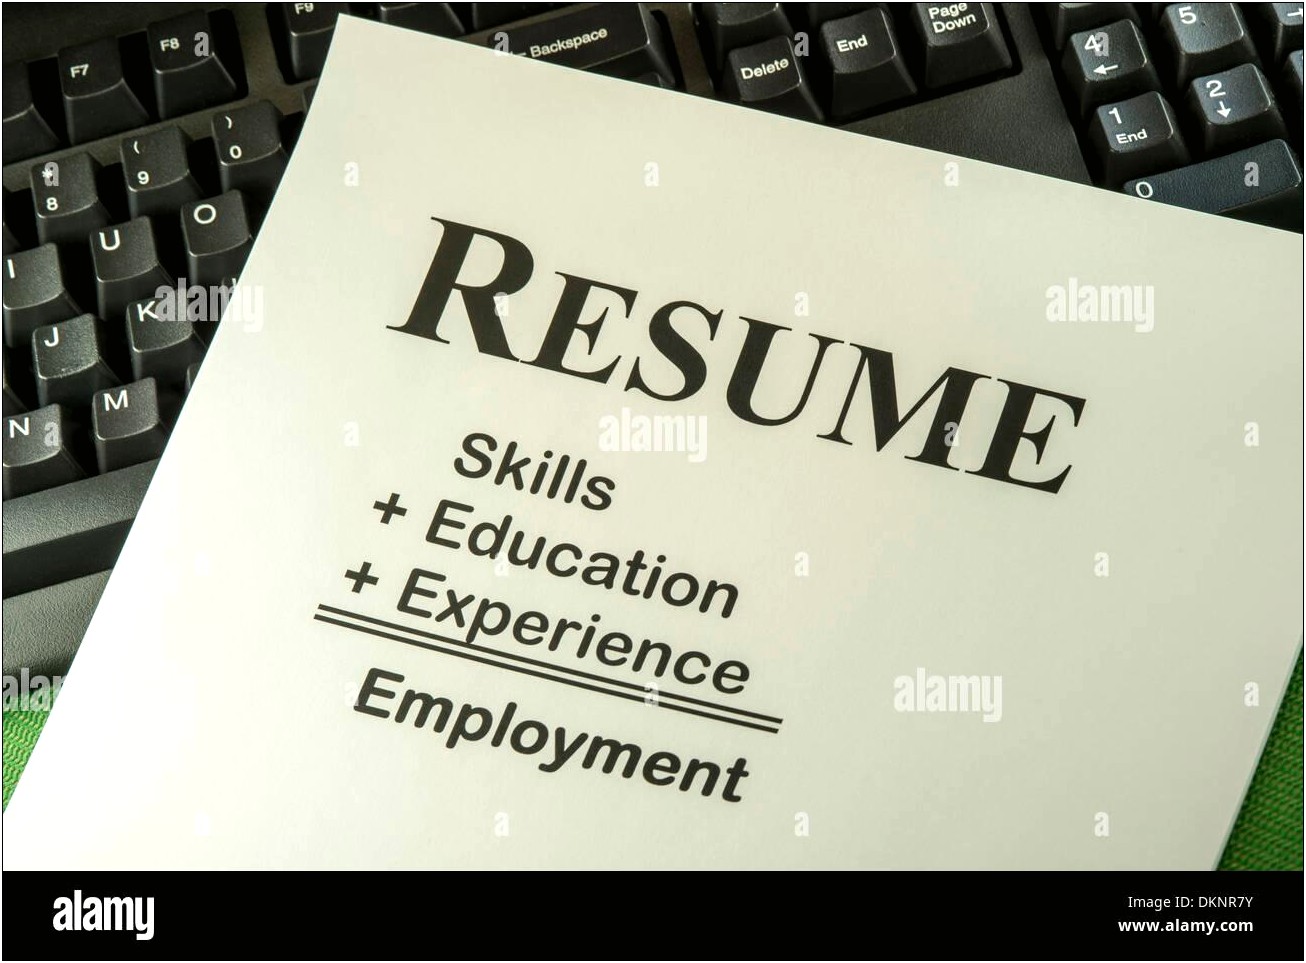 Skills In Education For A Resume